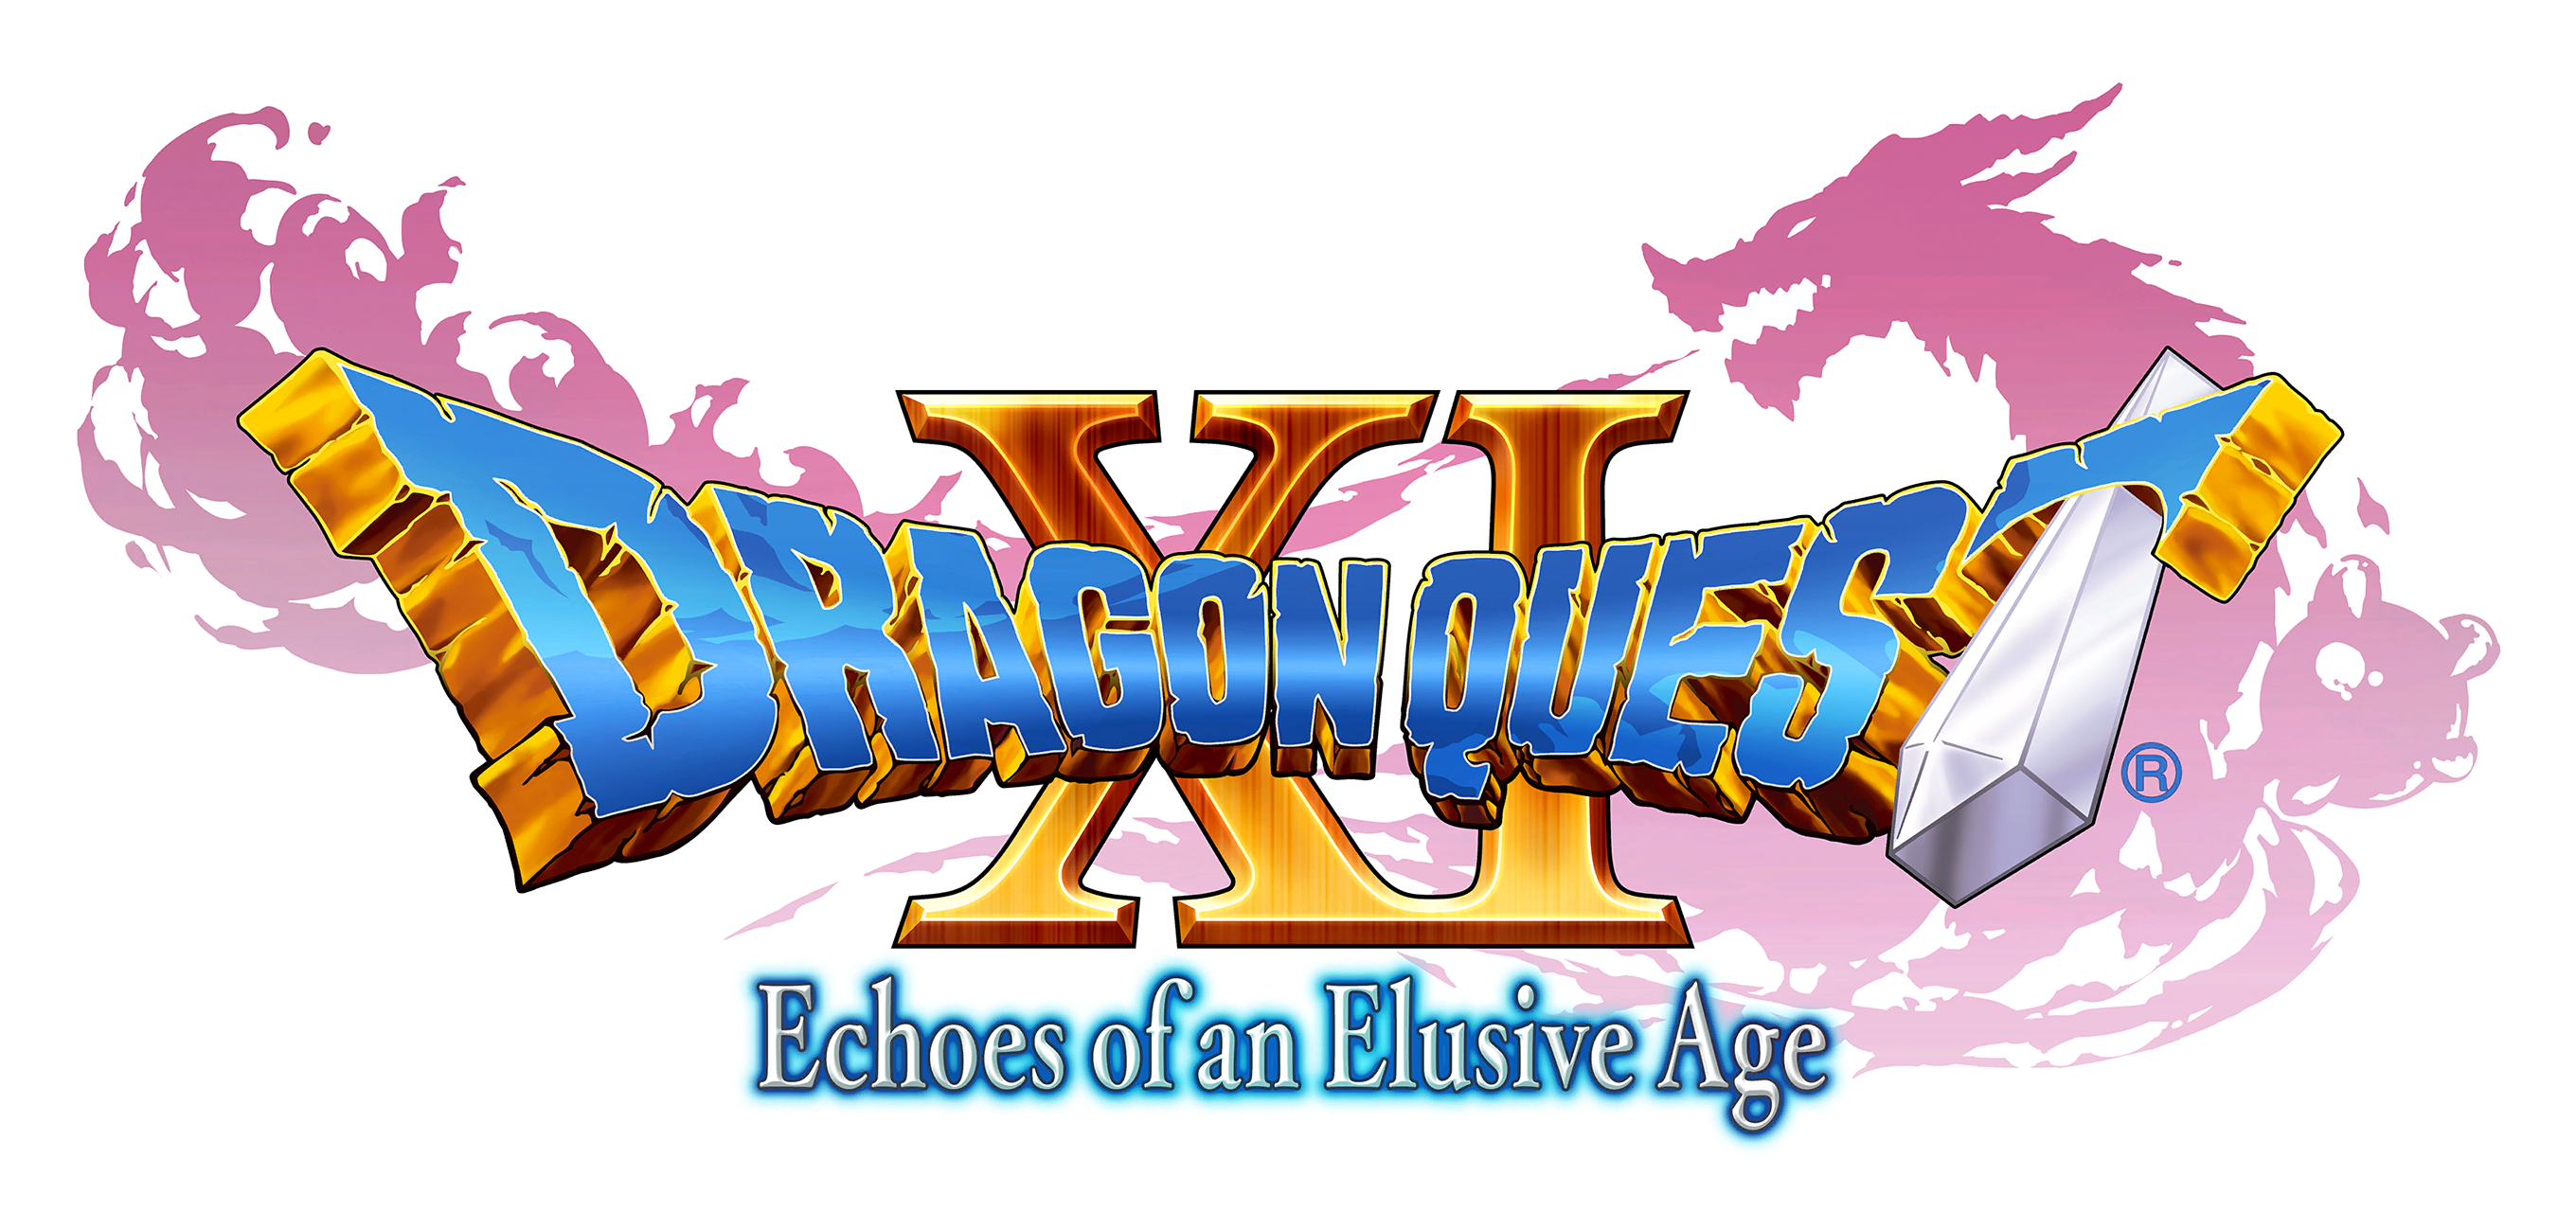 Dragon Quest 11 S: 10 Things To Do After You Beat The Game